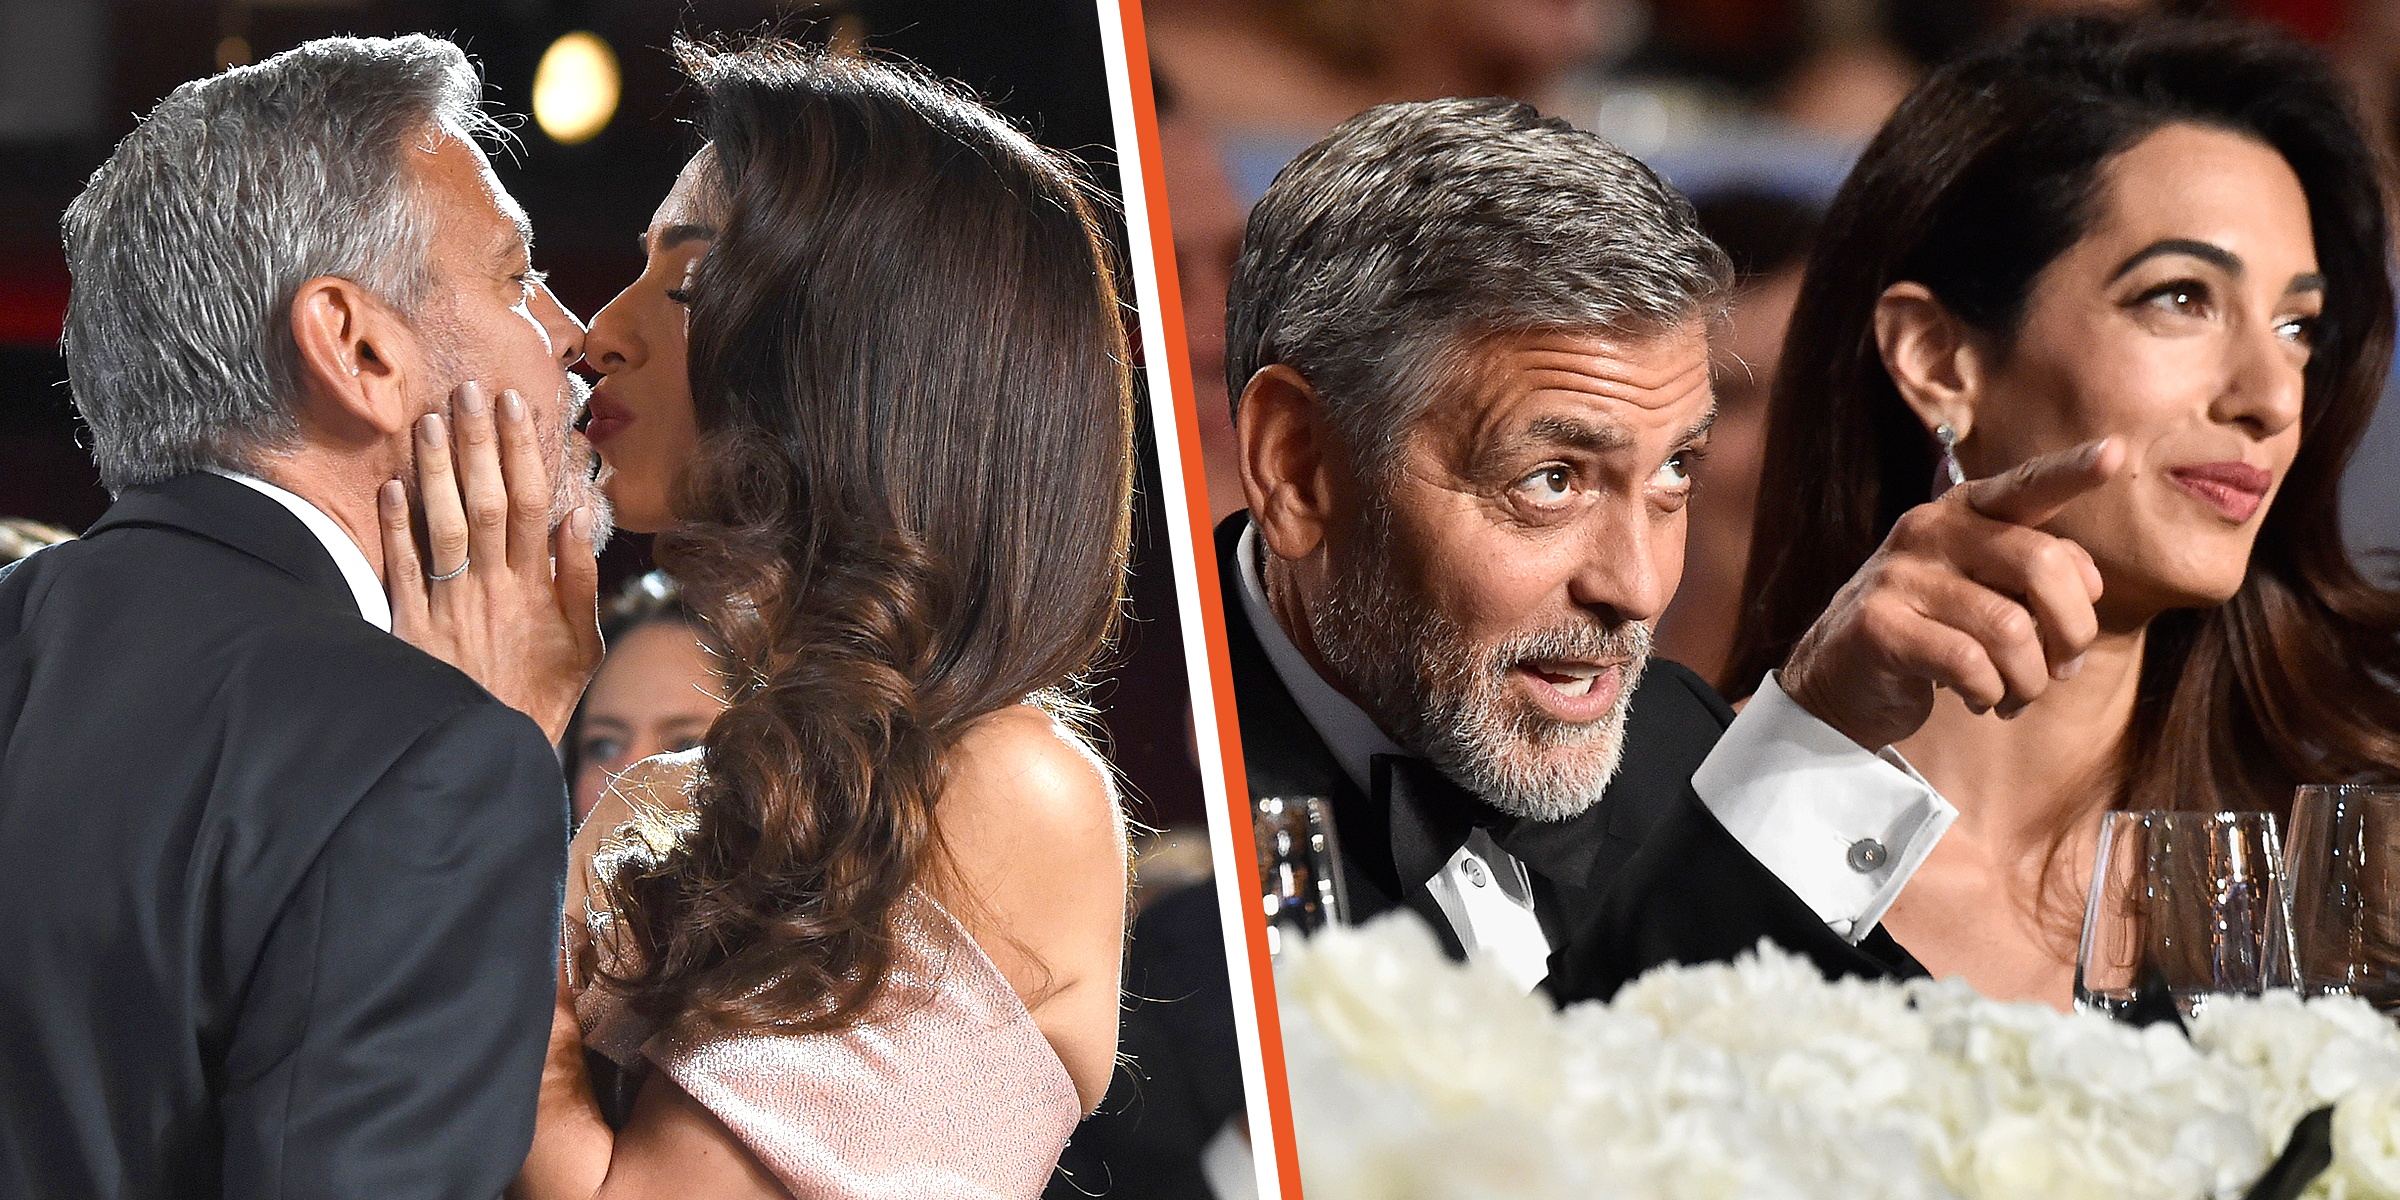 George and Amal Clooney | Source: Getty Images